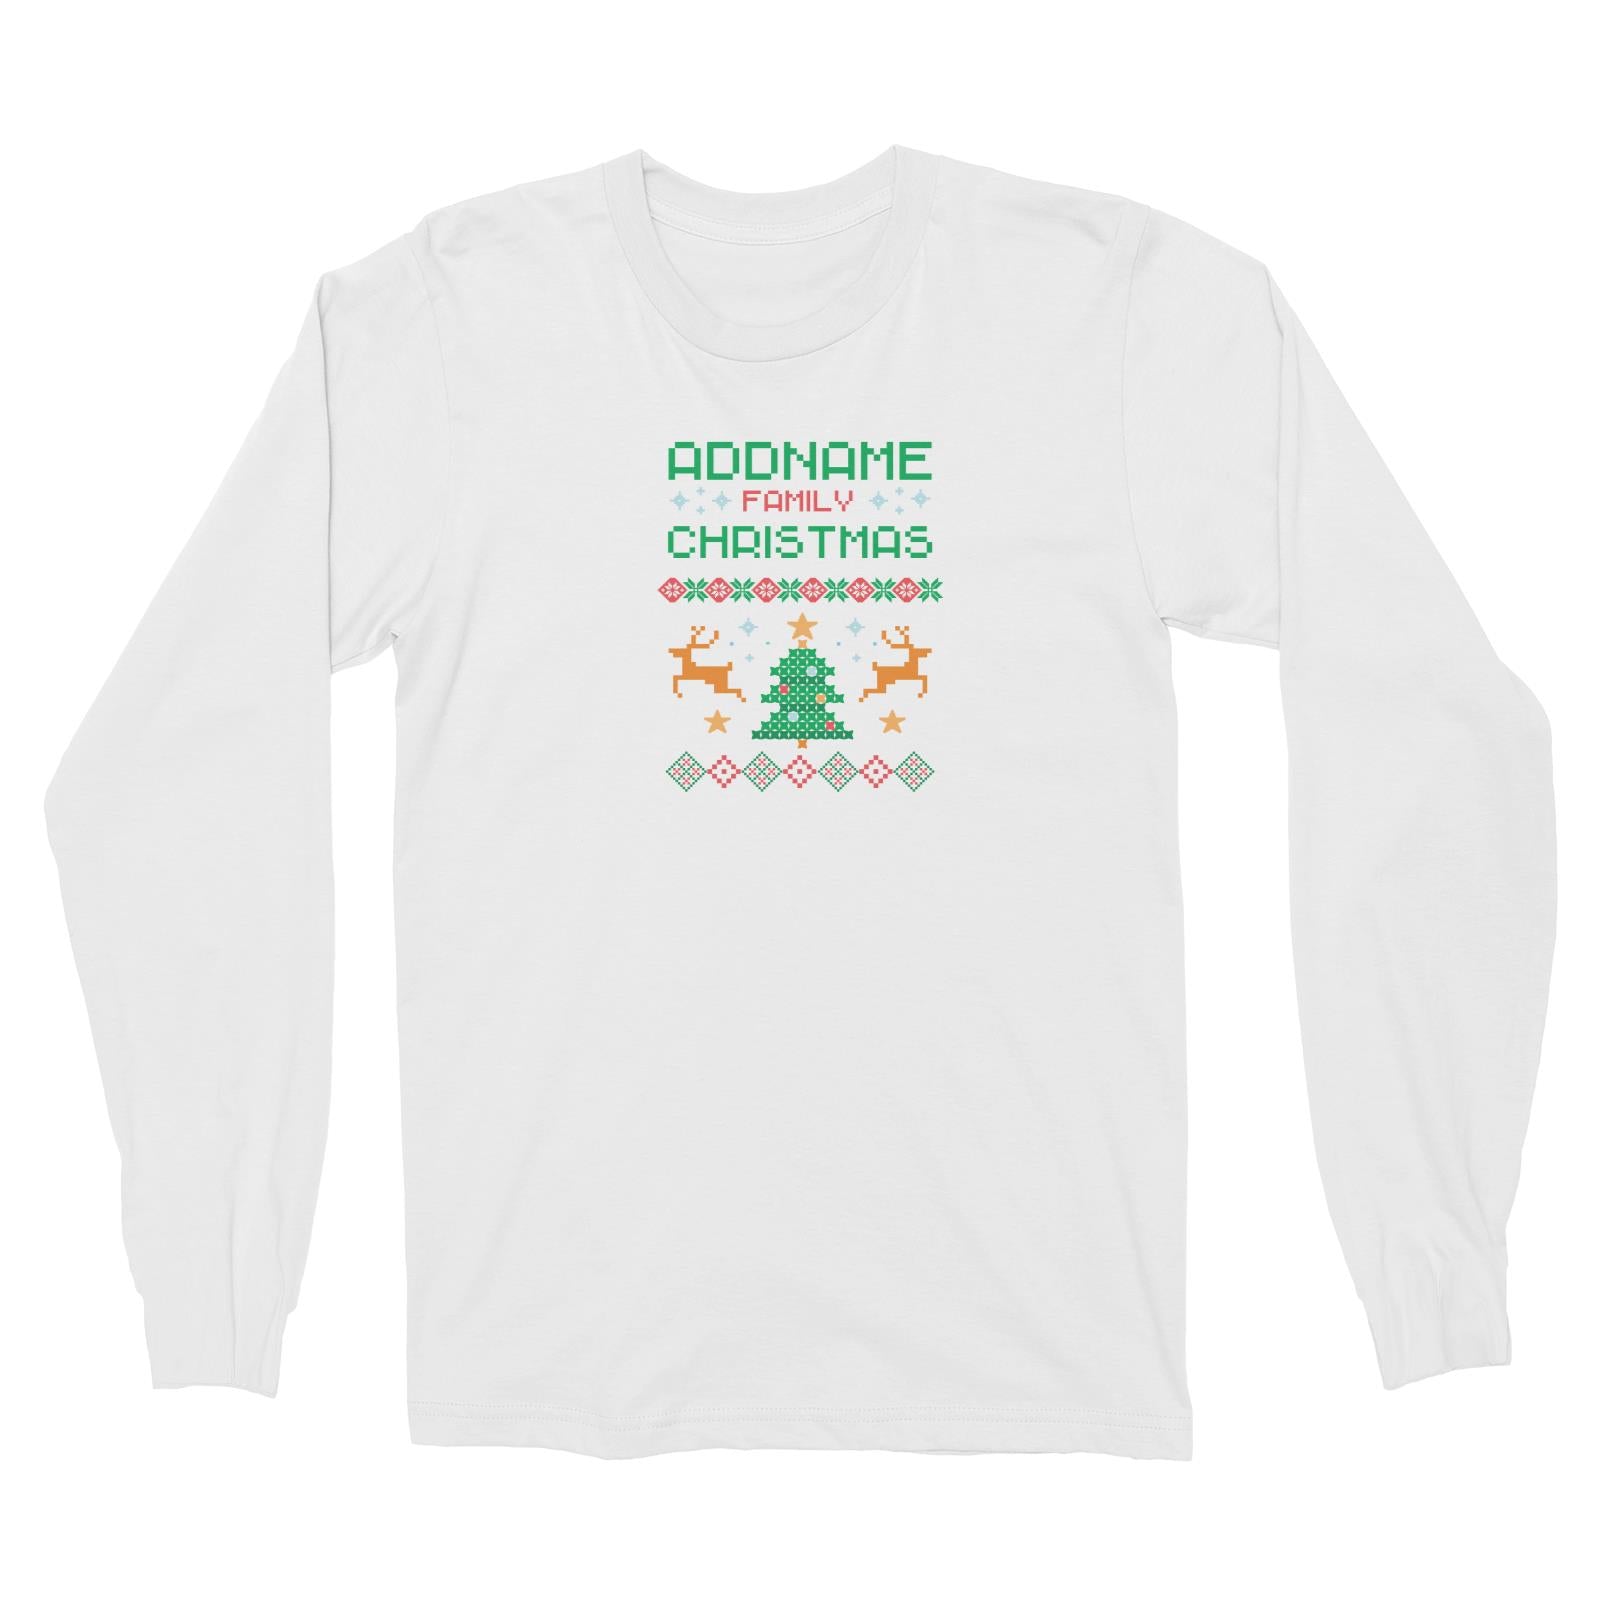 Christmas Series Addname Family Sweater Design Long Sleeve Unisex T-Shirt